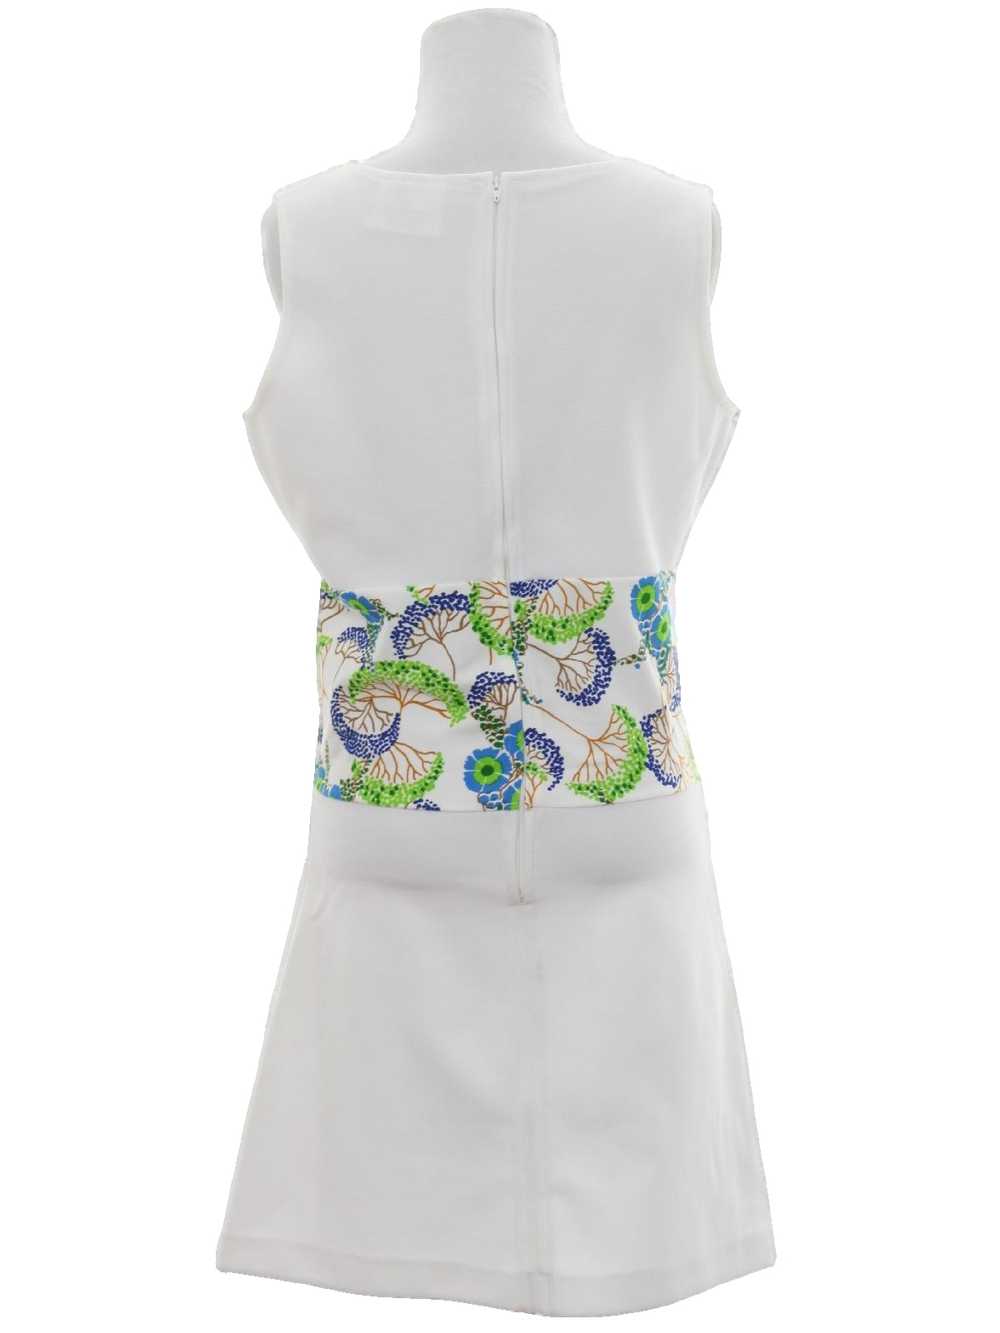 1970's White Stag Summer Dress - image 3